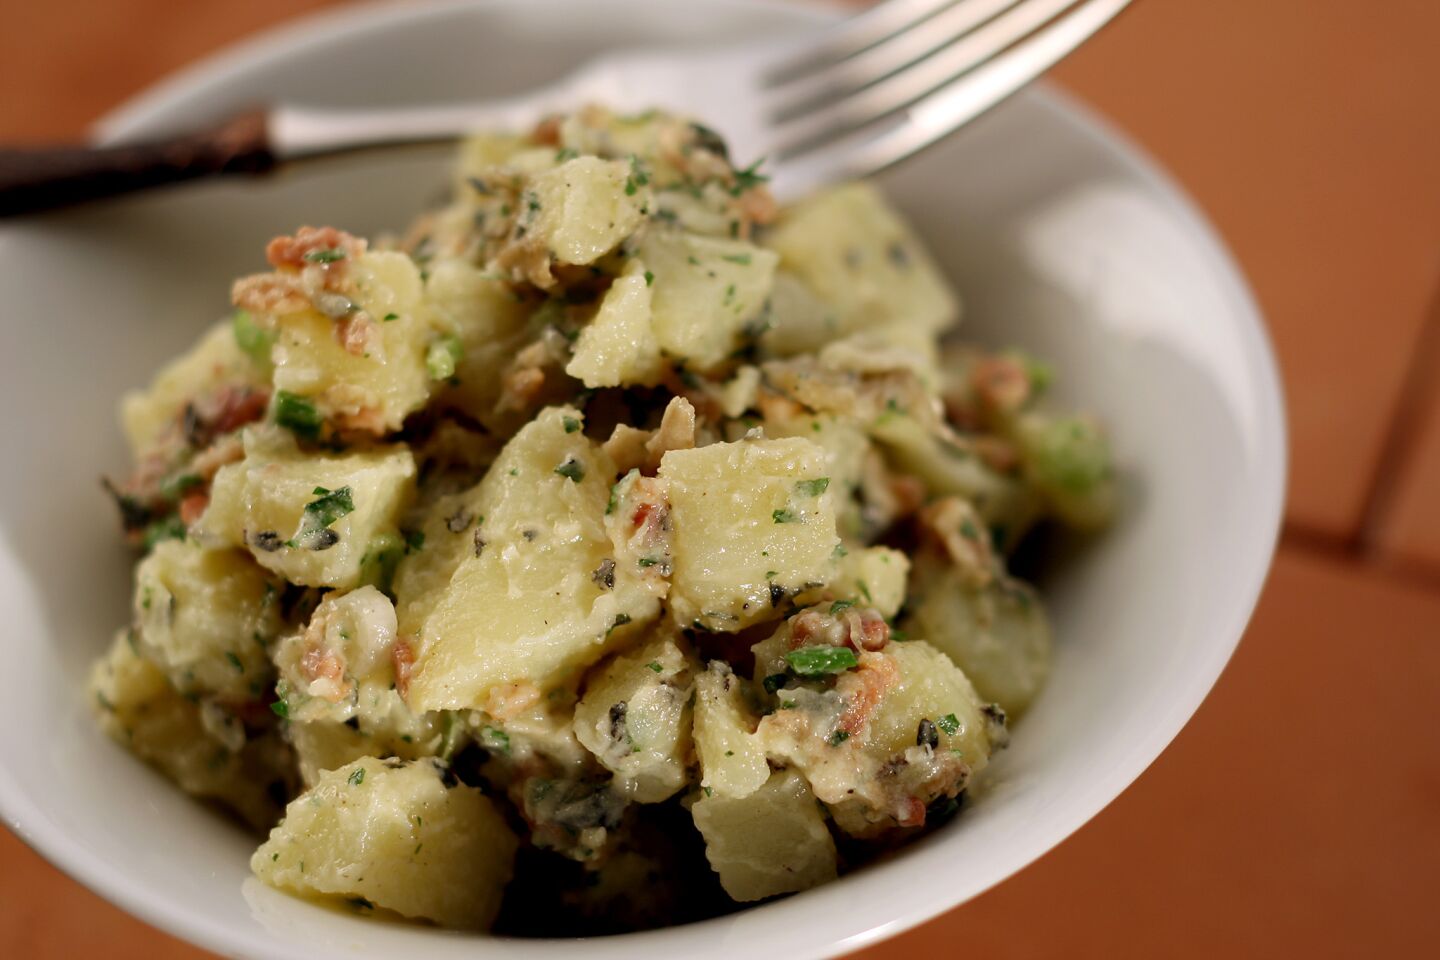 This is one of the most requested recipes from the Los Angeles Times Test Kitchen. Try it, and you'll know why. Recipe: The bacon potato salad at Cole's in downtown L.A.